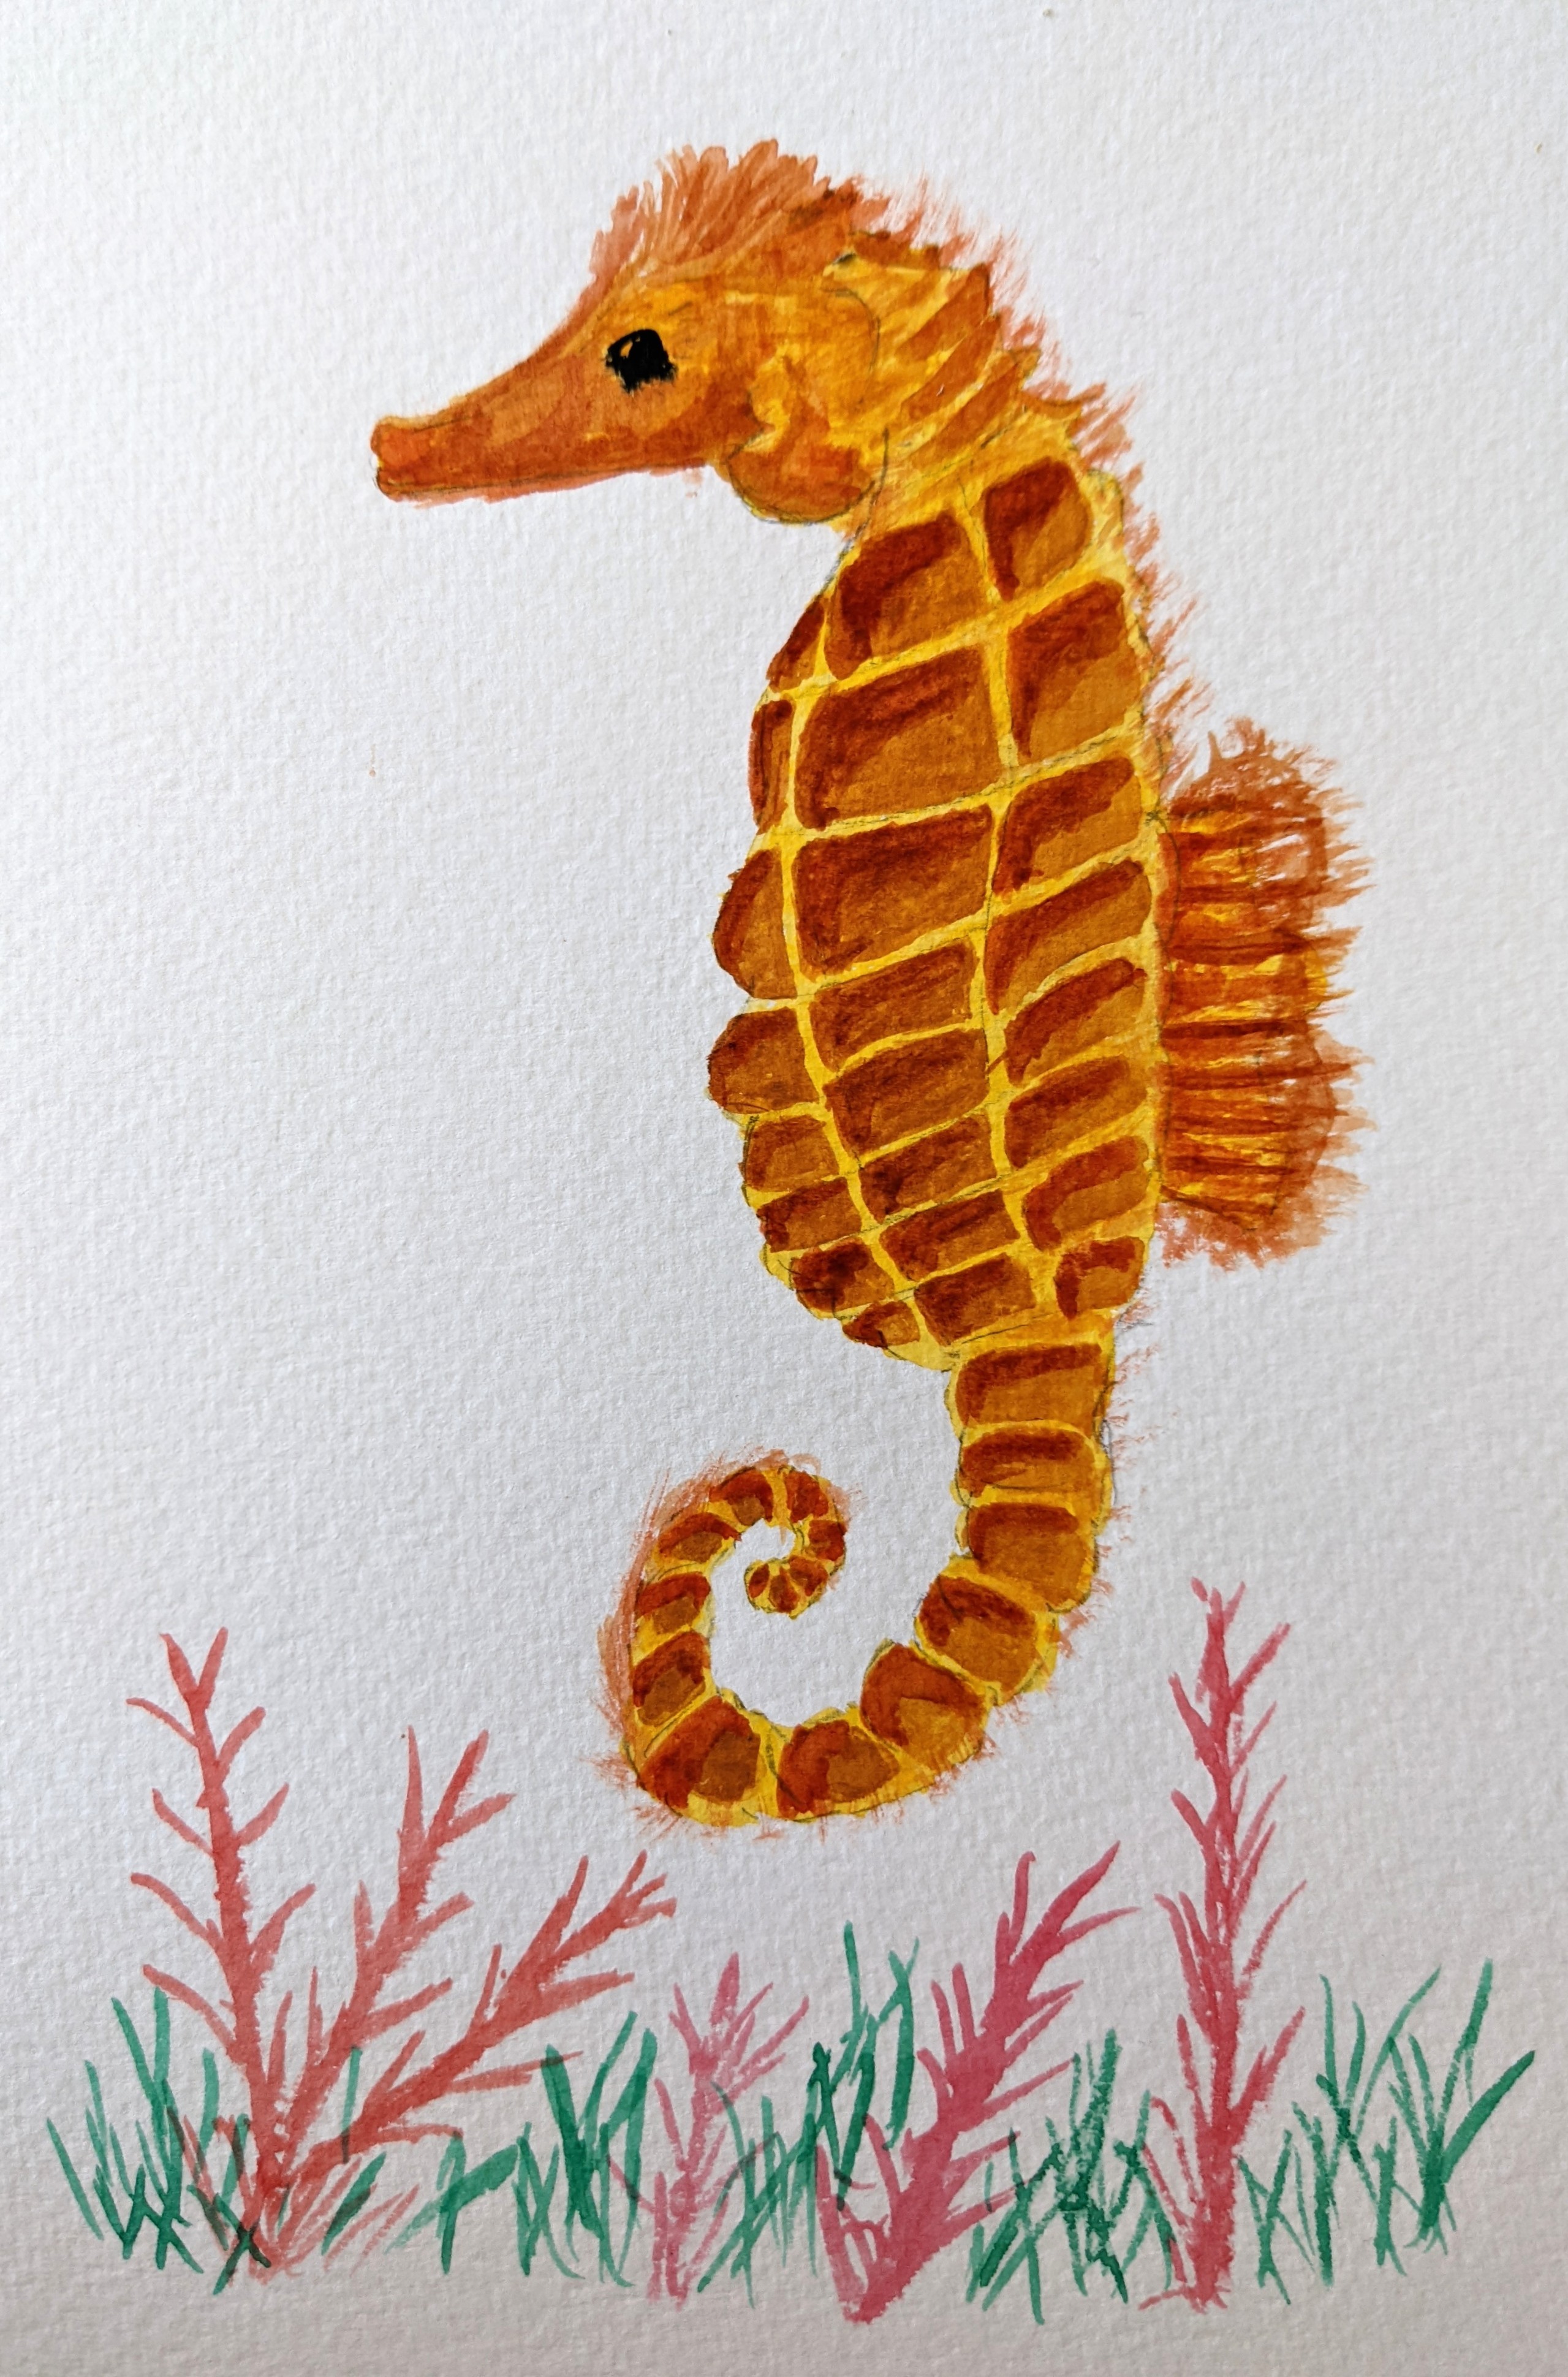 Watercolor painting of a seahorse in yellows browns and reds floating above slight green and pink vegetation